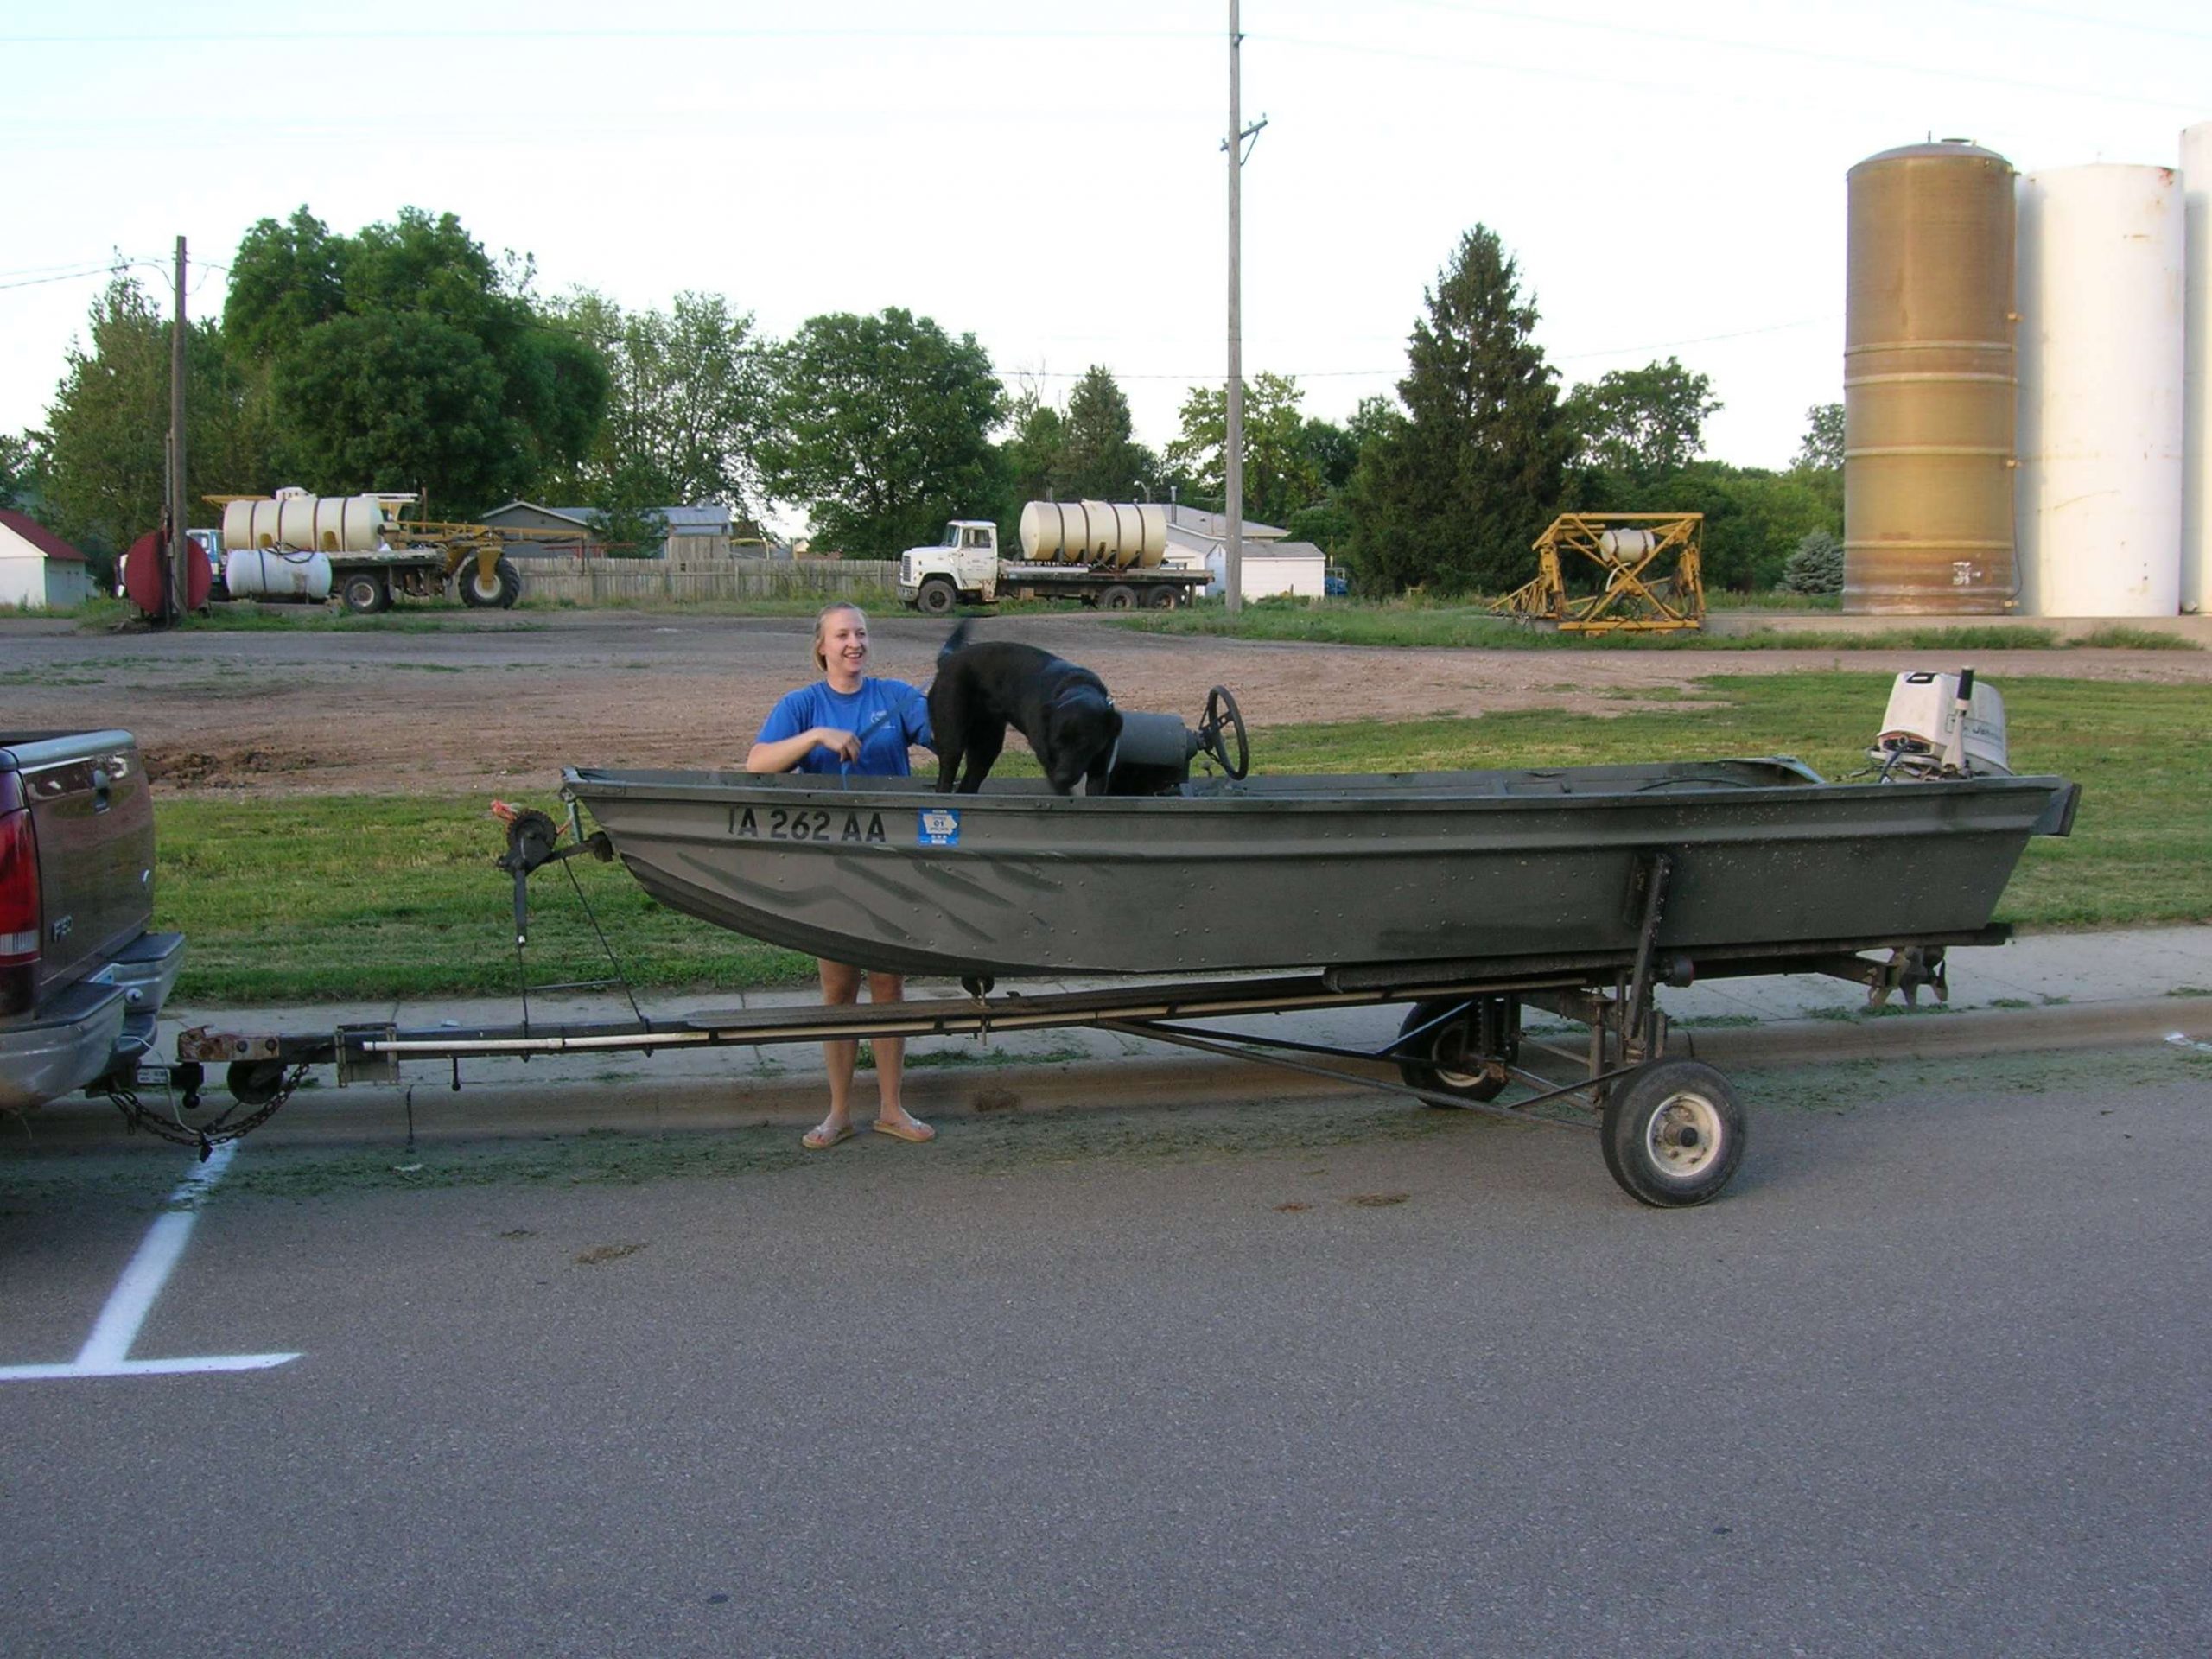 This was my first boat, probably in that 2004 to 2005 time frame. My wife and I had moved from Minot, N.D., to Ely, Iowa, closer to home, and a boat was a long-time dream. This where I started. Putting this gallery together has been a pleasure and a trip down memory lane for me. I'm glad I took photos of some of the process, but wished I had taken more and better images. Some of the pix will be blurry, but at the very end of this thing, you'll learn about an untimely and unfortunate end to the Green Hornet -- name I picked from 